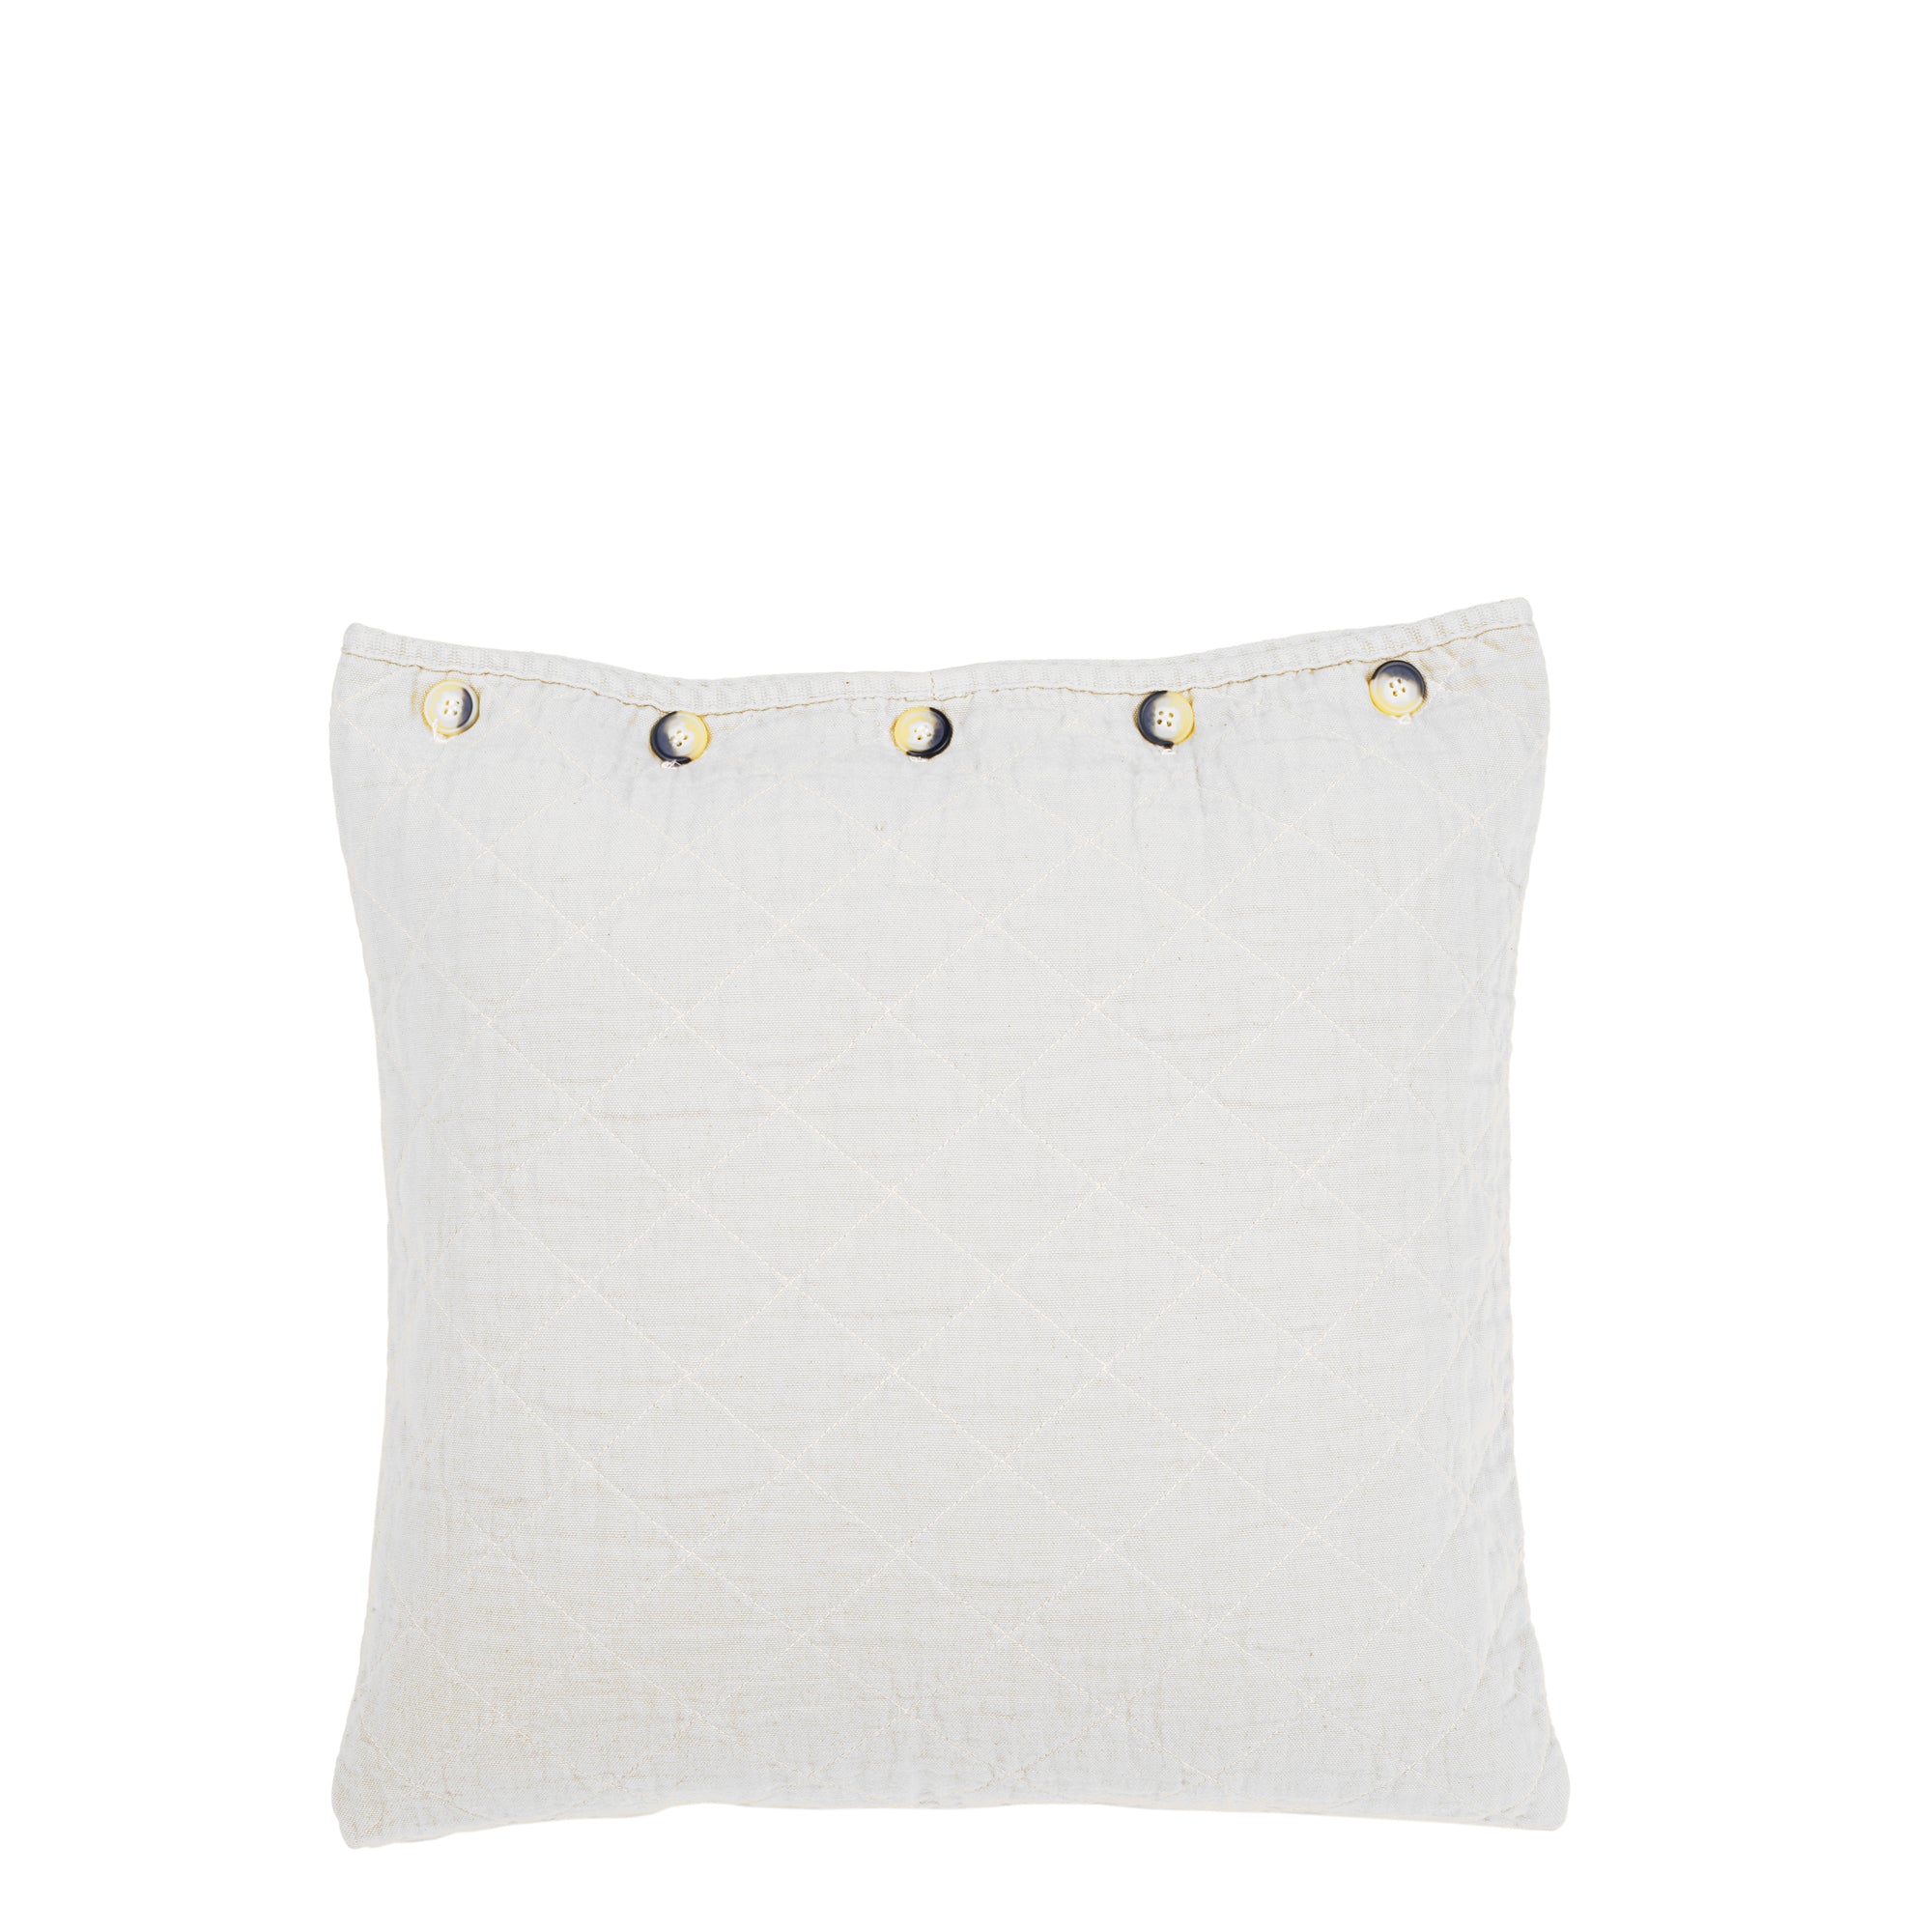 White Throw Pillow, Solid with Polka Dots